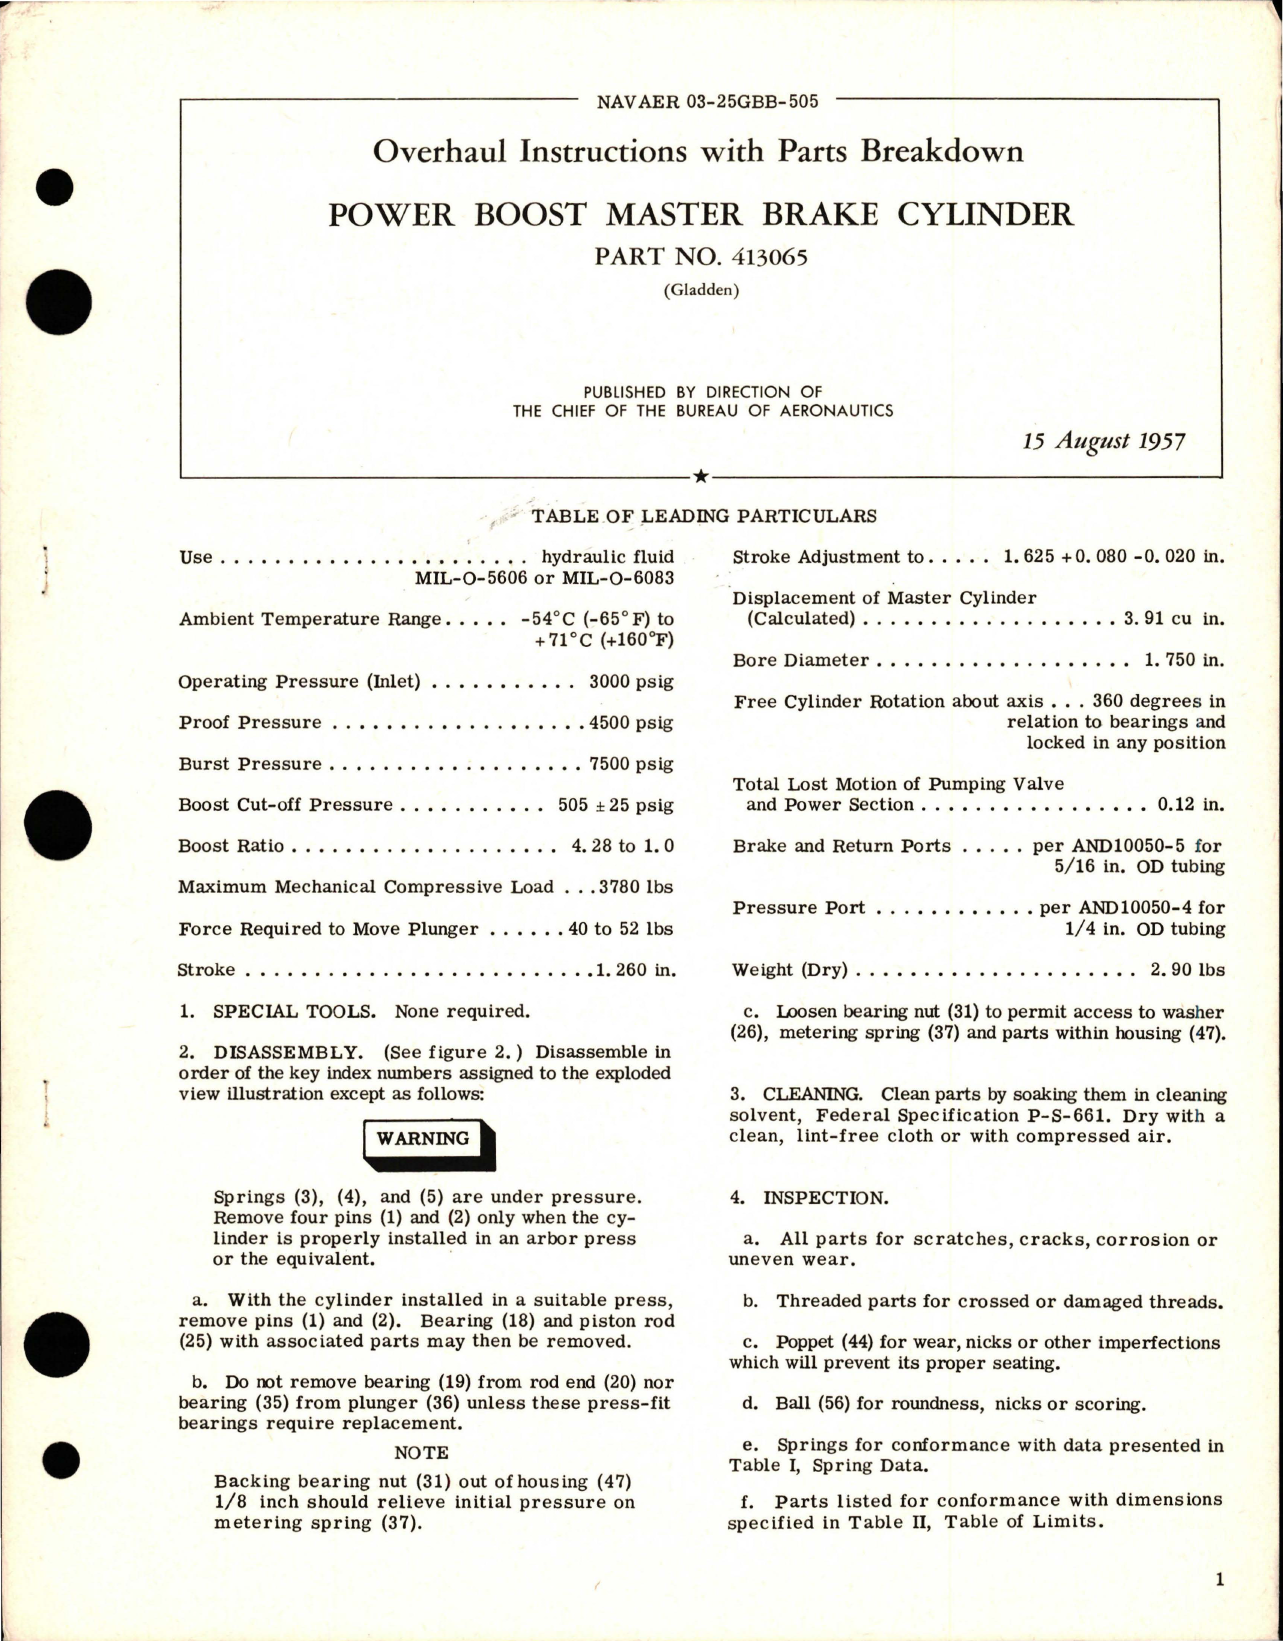 Sample page 1 from AirCorps Library document: Overhaul Instructions with Parts Breakdown for Power Boost Master Brake Cylinder - Part 413065